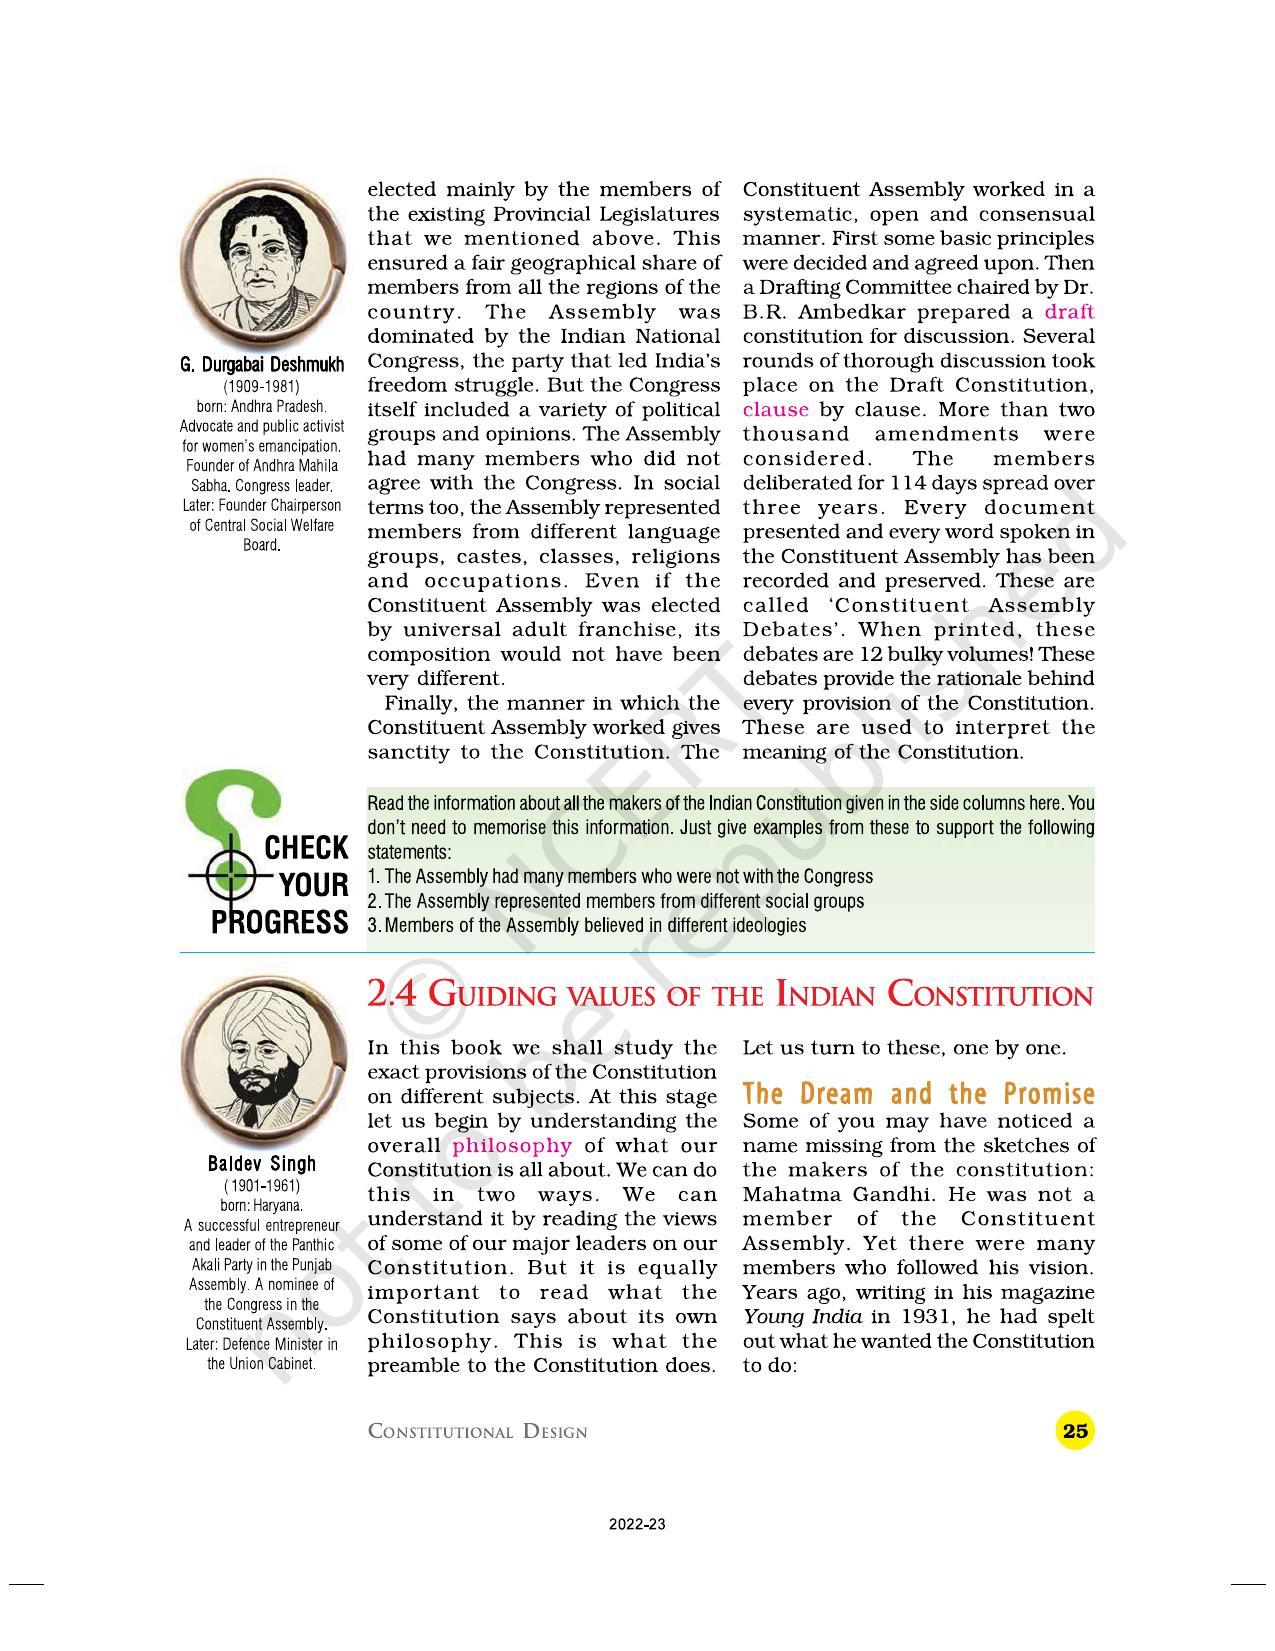 NCERT Book for Class 9 Civics Chapter 3 Constitutional Design - Page 8